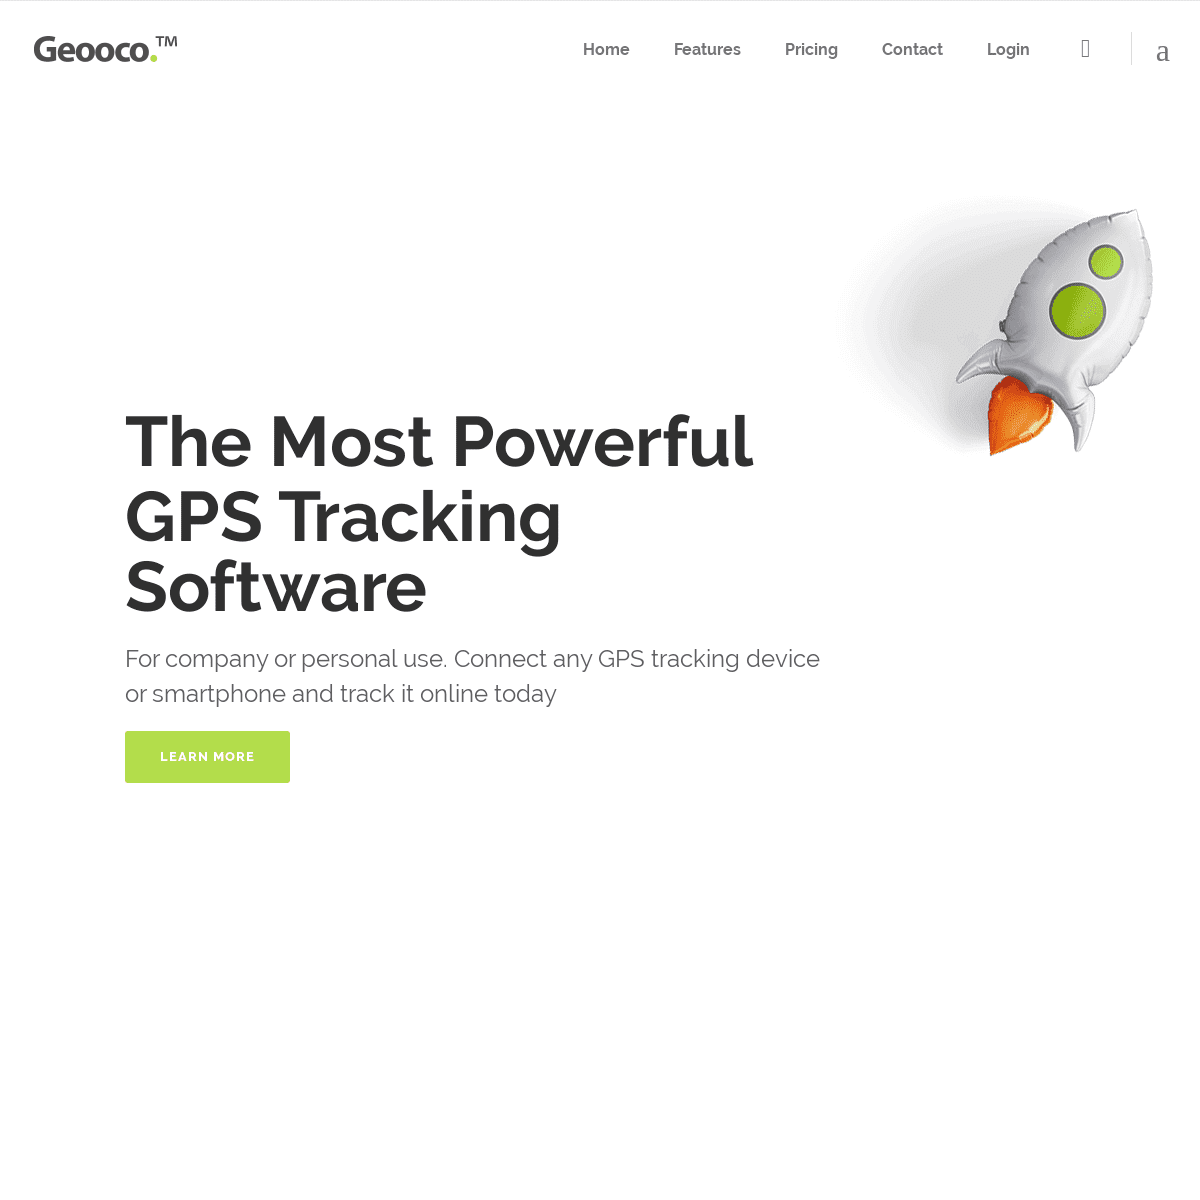 A complete backup of geooco.com